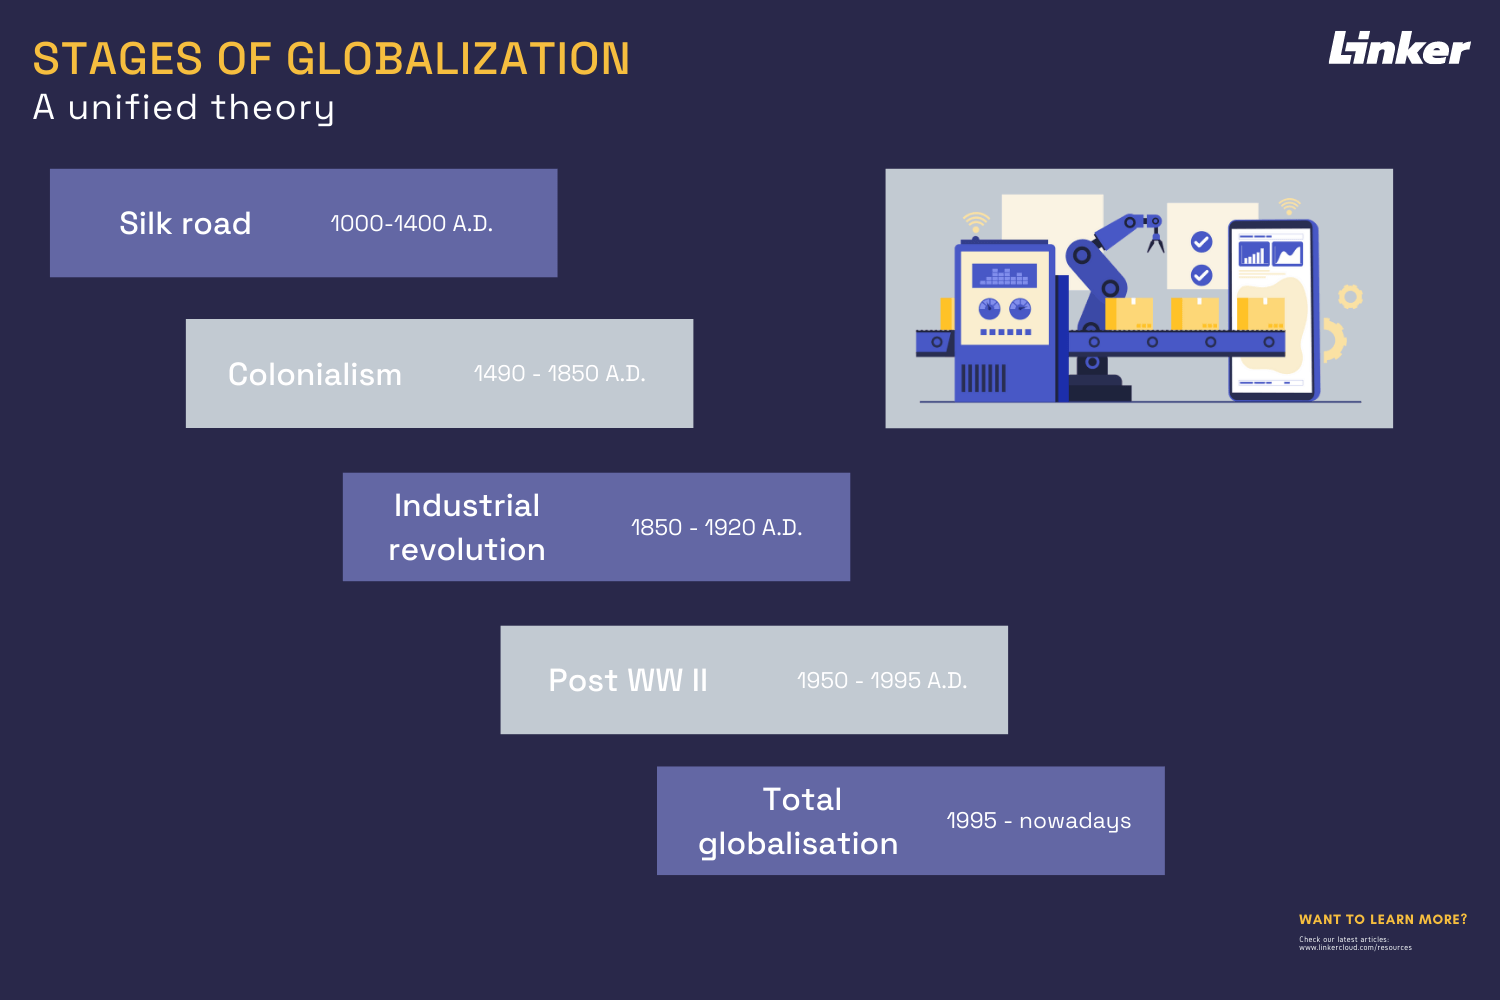 Infographic-Stages of globalization: silk road, colonialism, industrial revolution, post wwII, total globalisation.